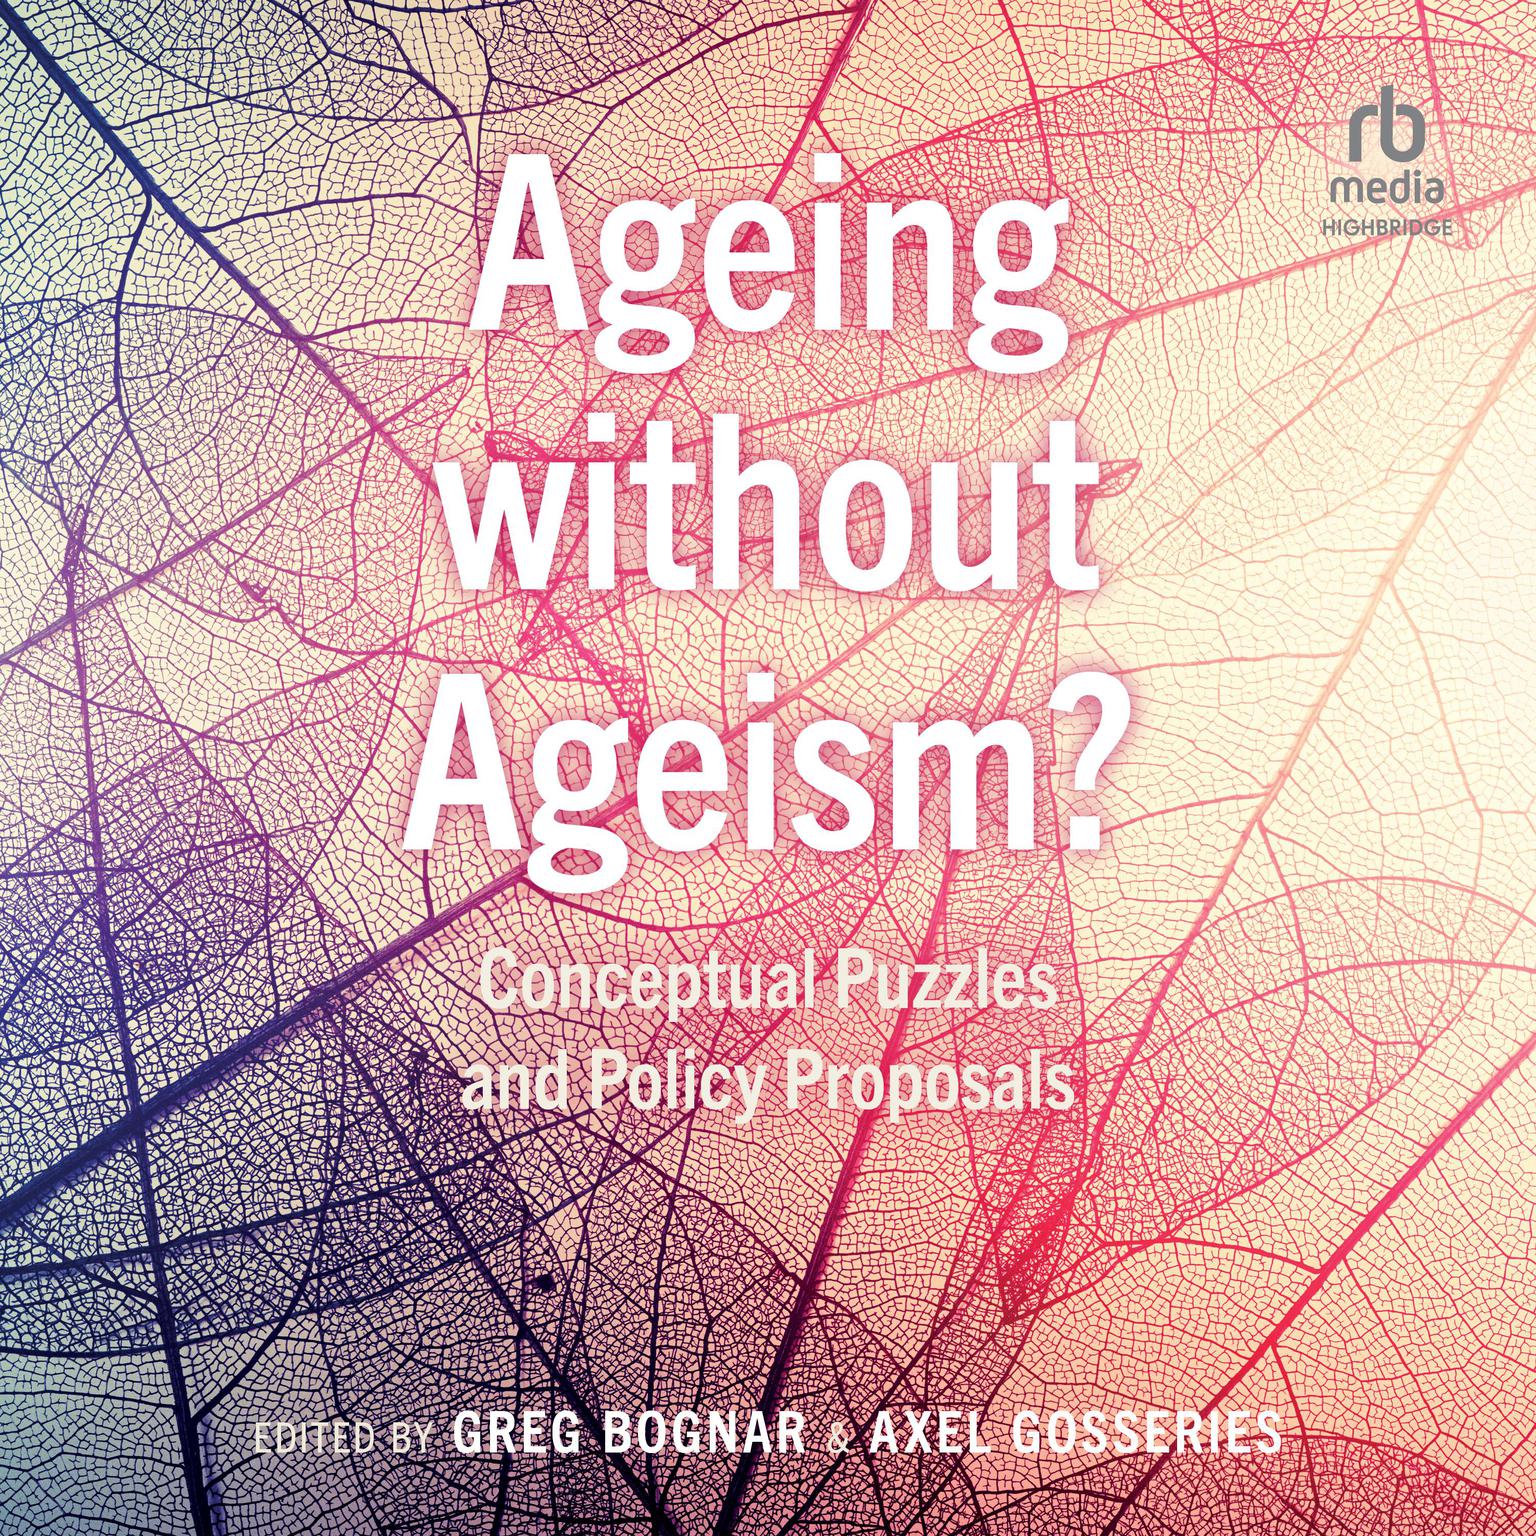 Ageing without Ageism?: Conceptual Puzzles and Policy Proposals Audiobook, by Axel Gosseries